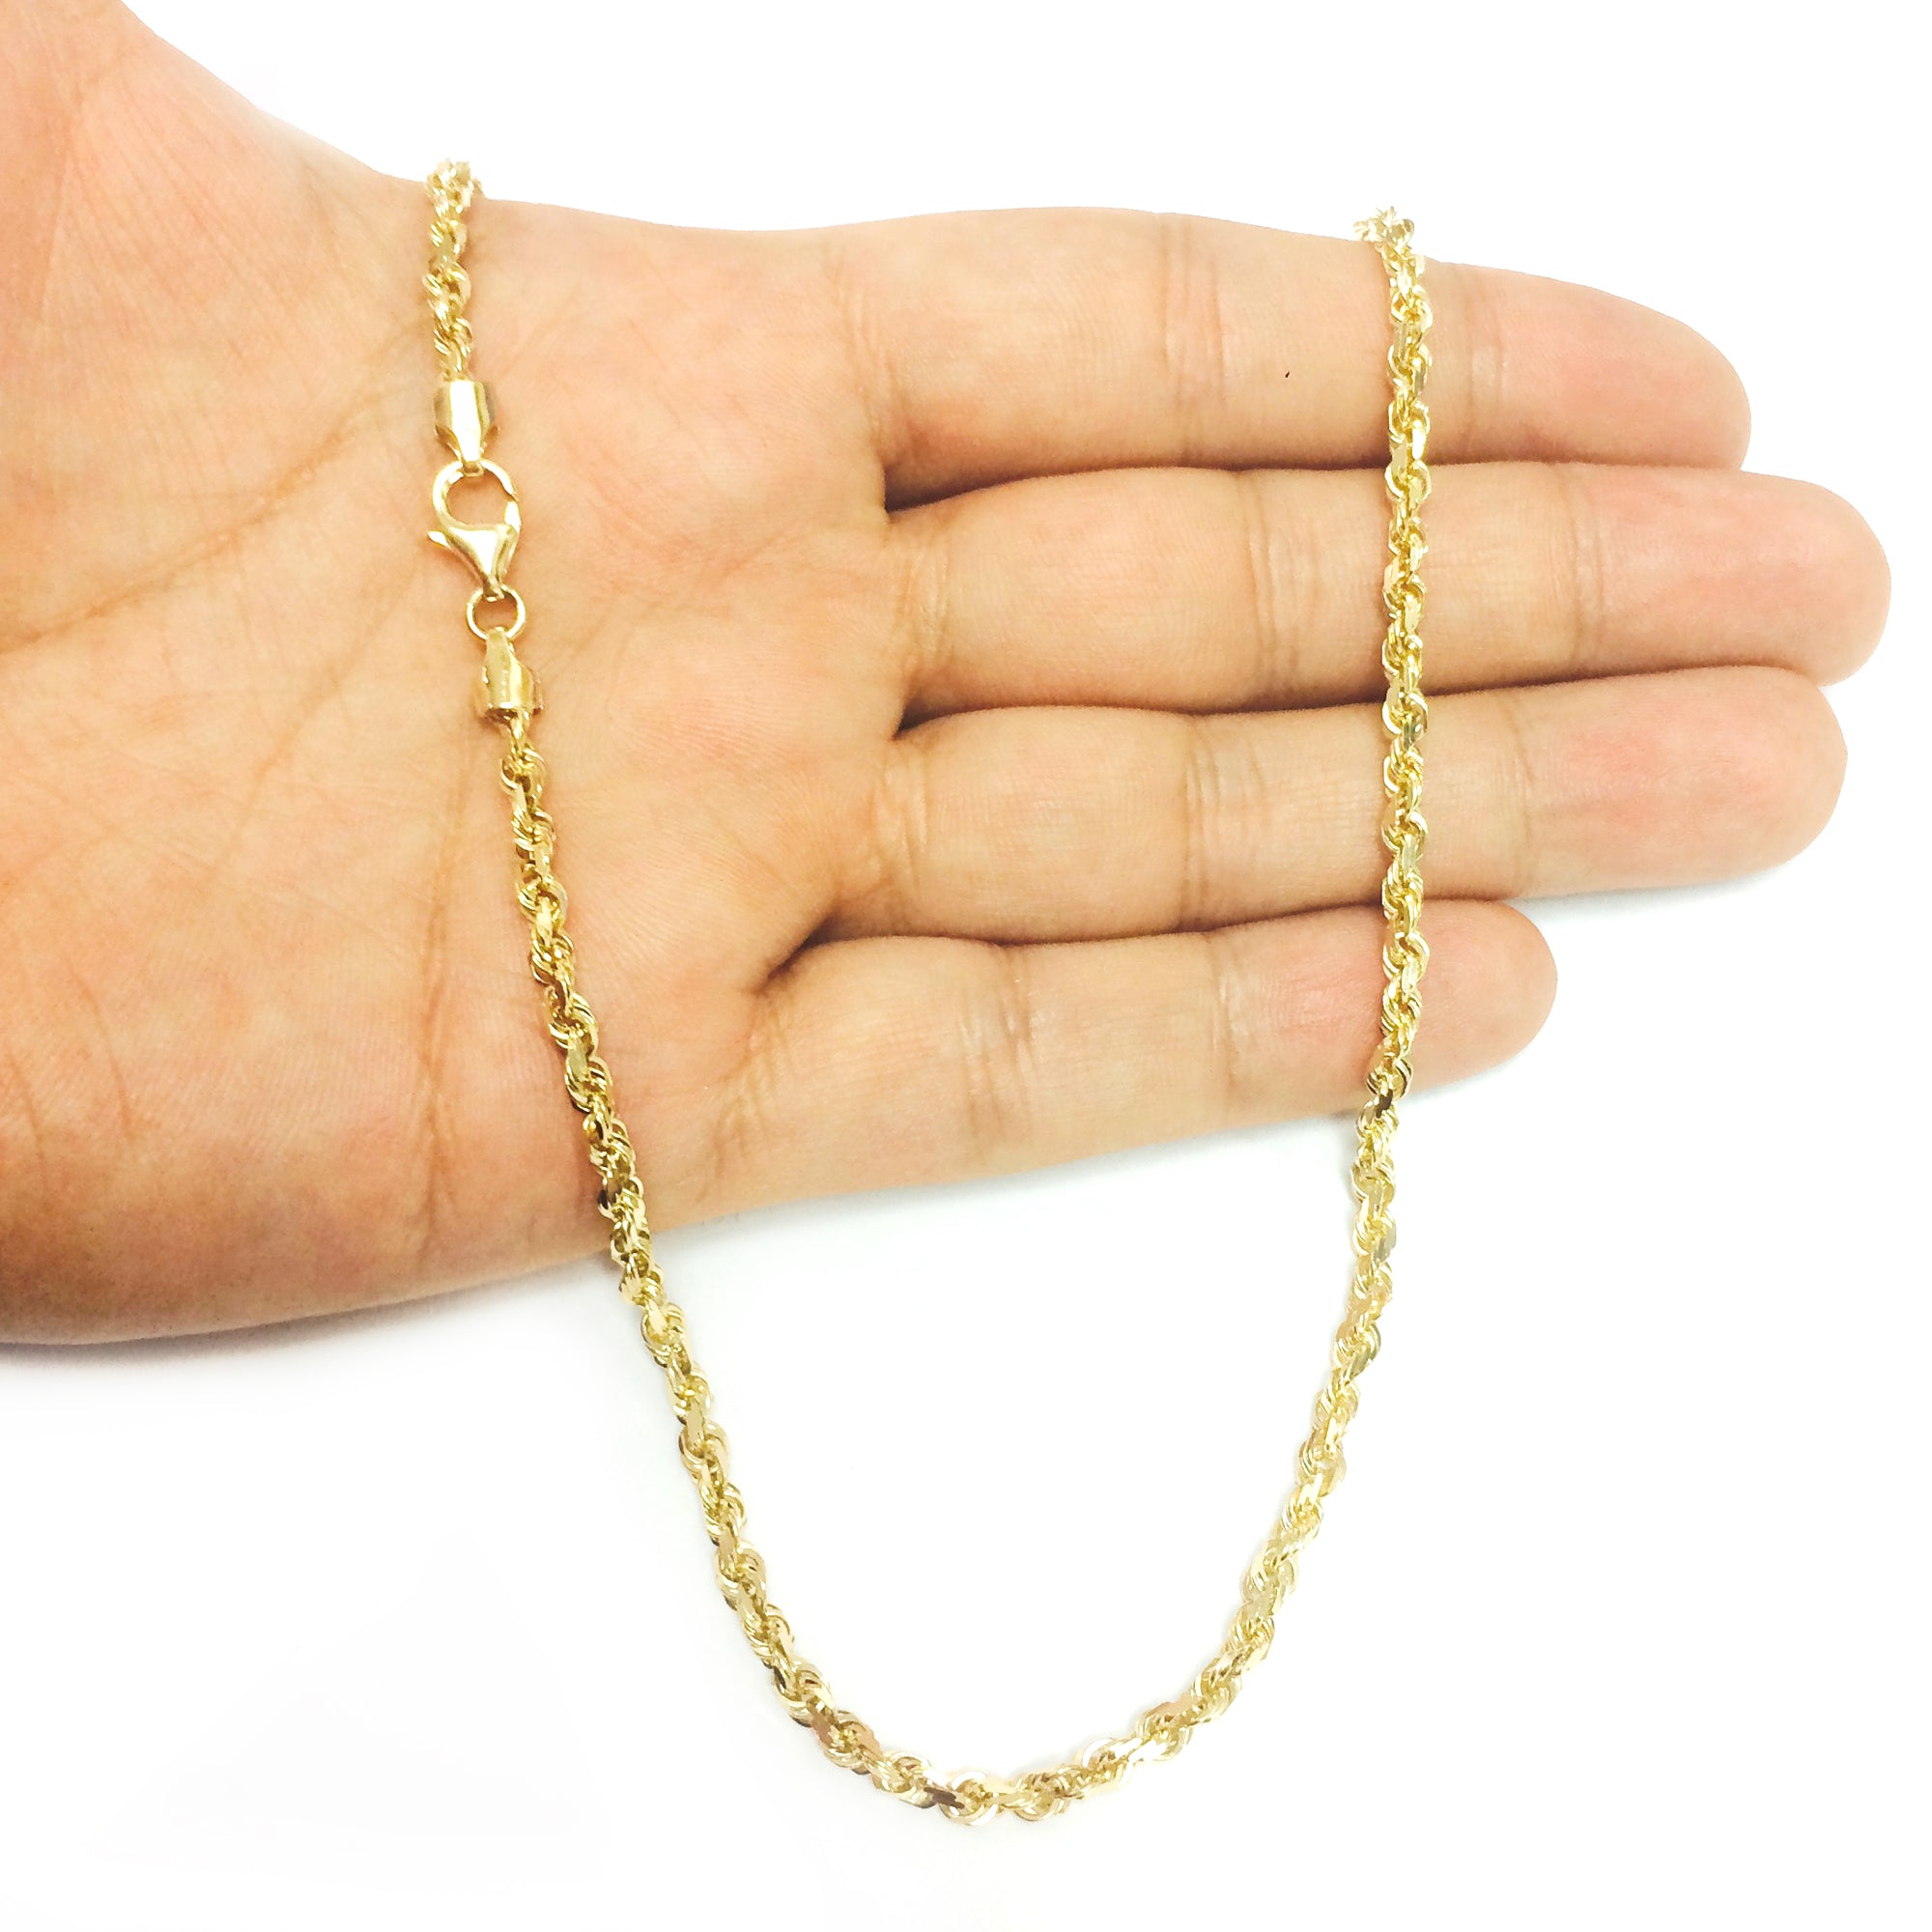 10k Yellow Solid Gold Diamond Cut Rope Chain Necklace, 3.5mm fine designer jewelry for men and women